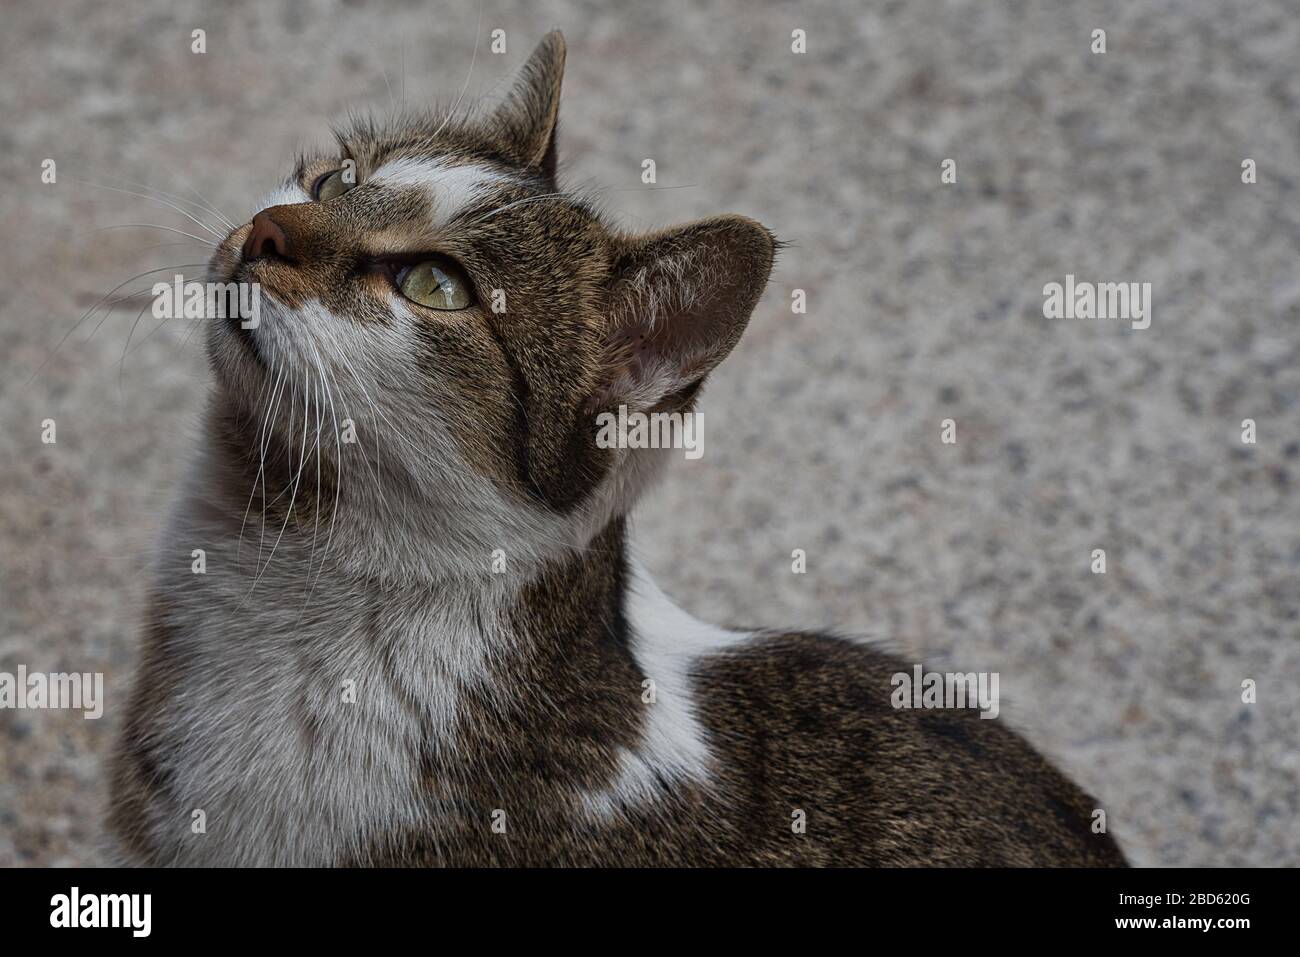 Cute stray cat girl with beautiful eyes, close up face kitten image Stock Photo